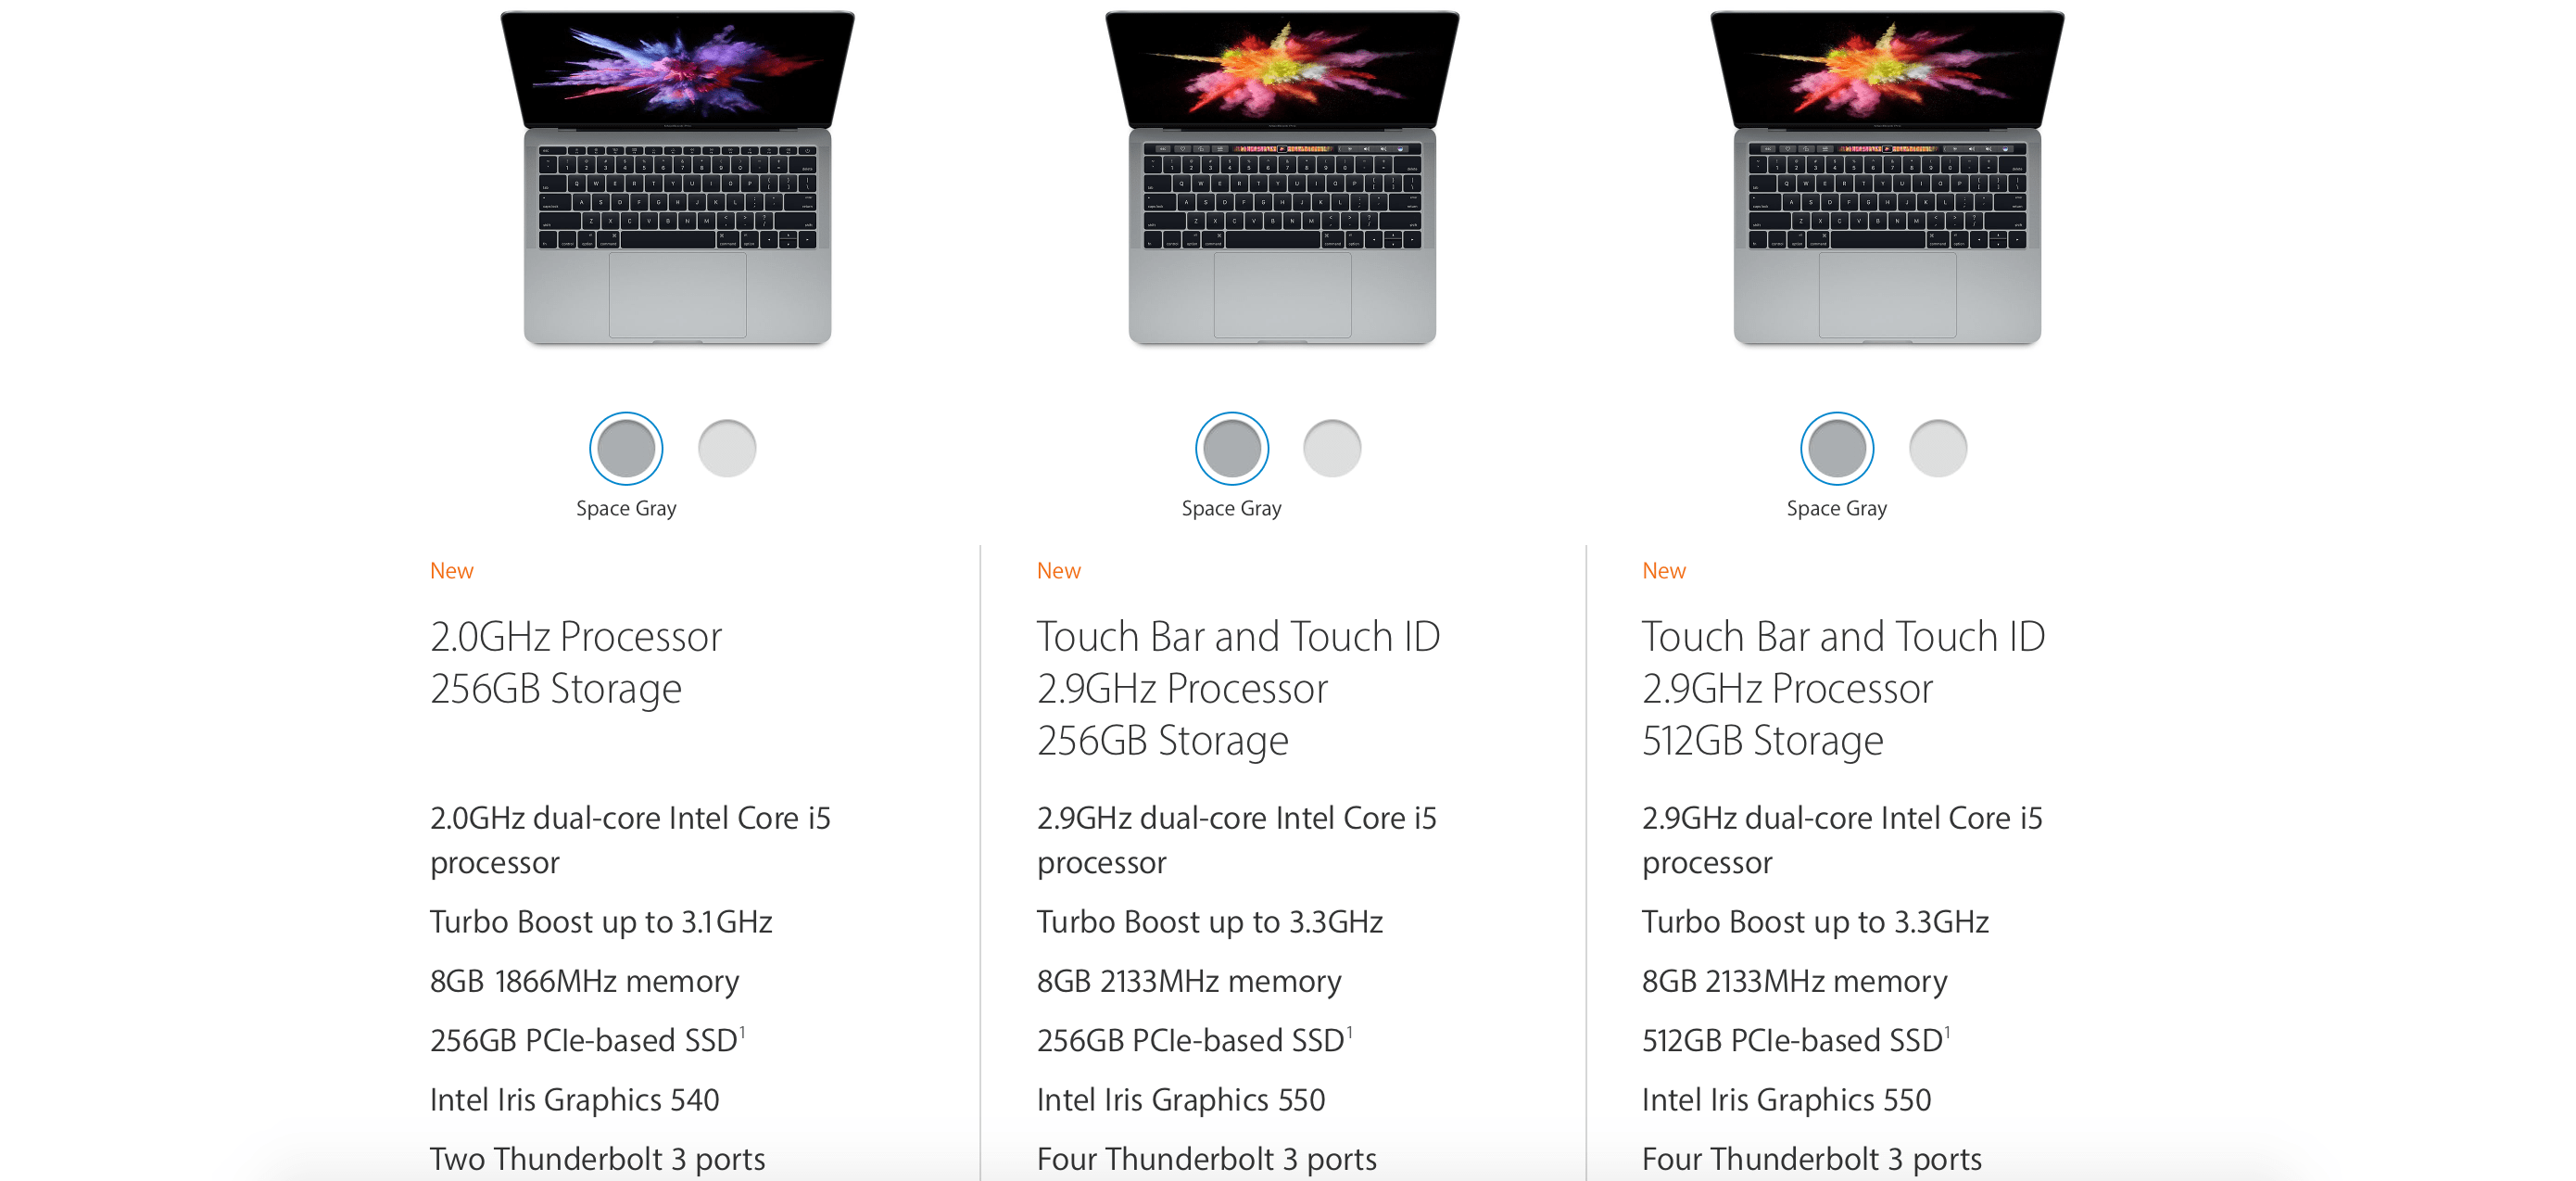 Comparison Here's how Apple's current MacBook lineup looks in terms of